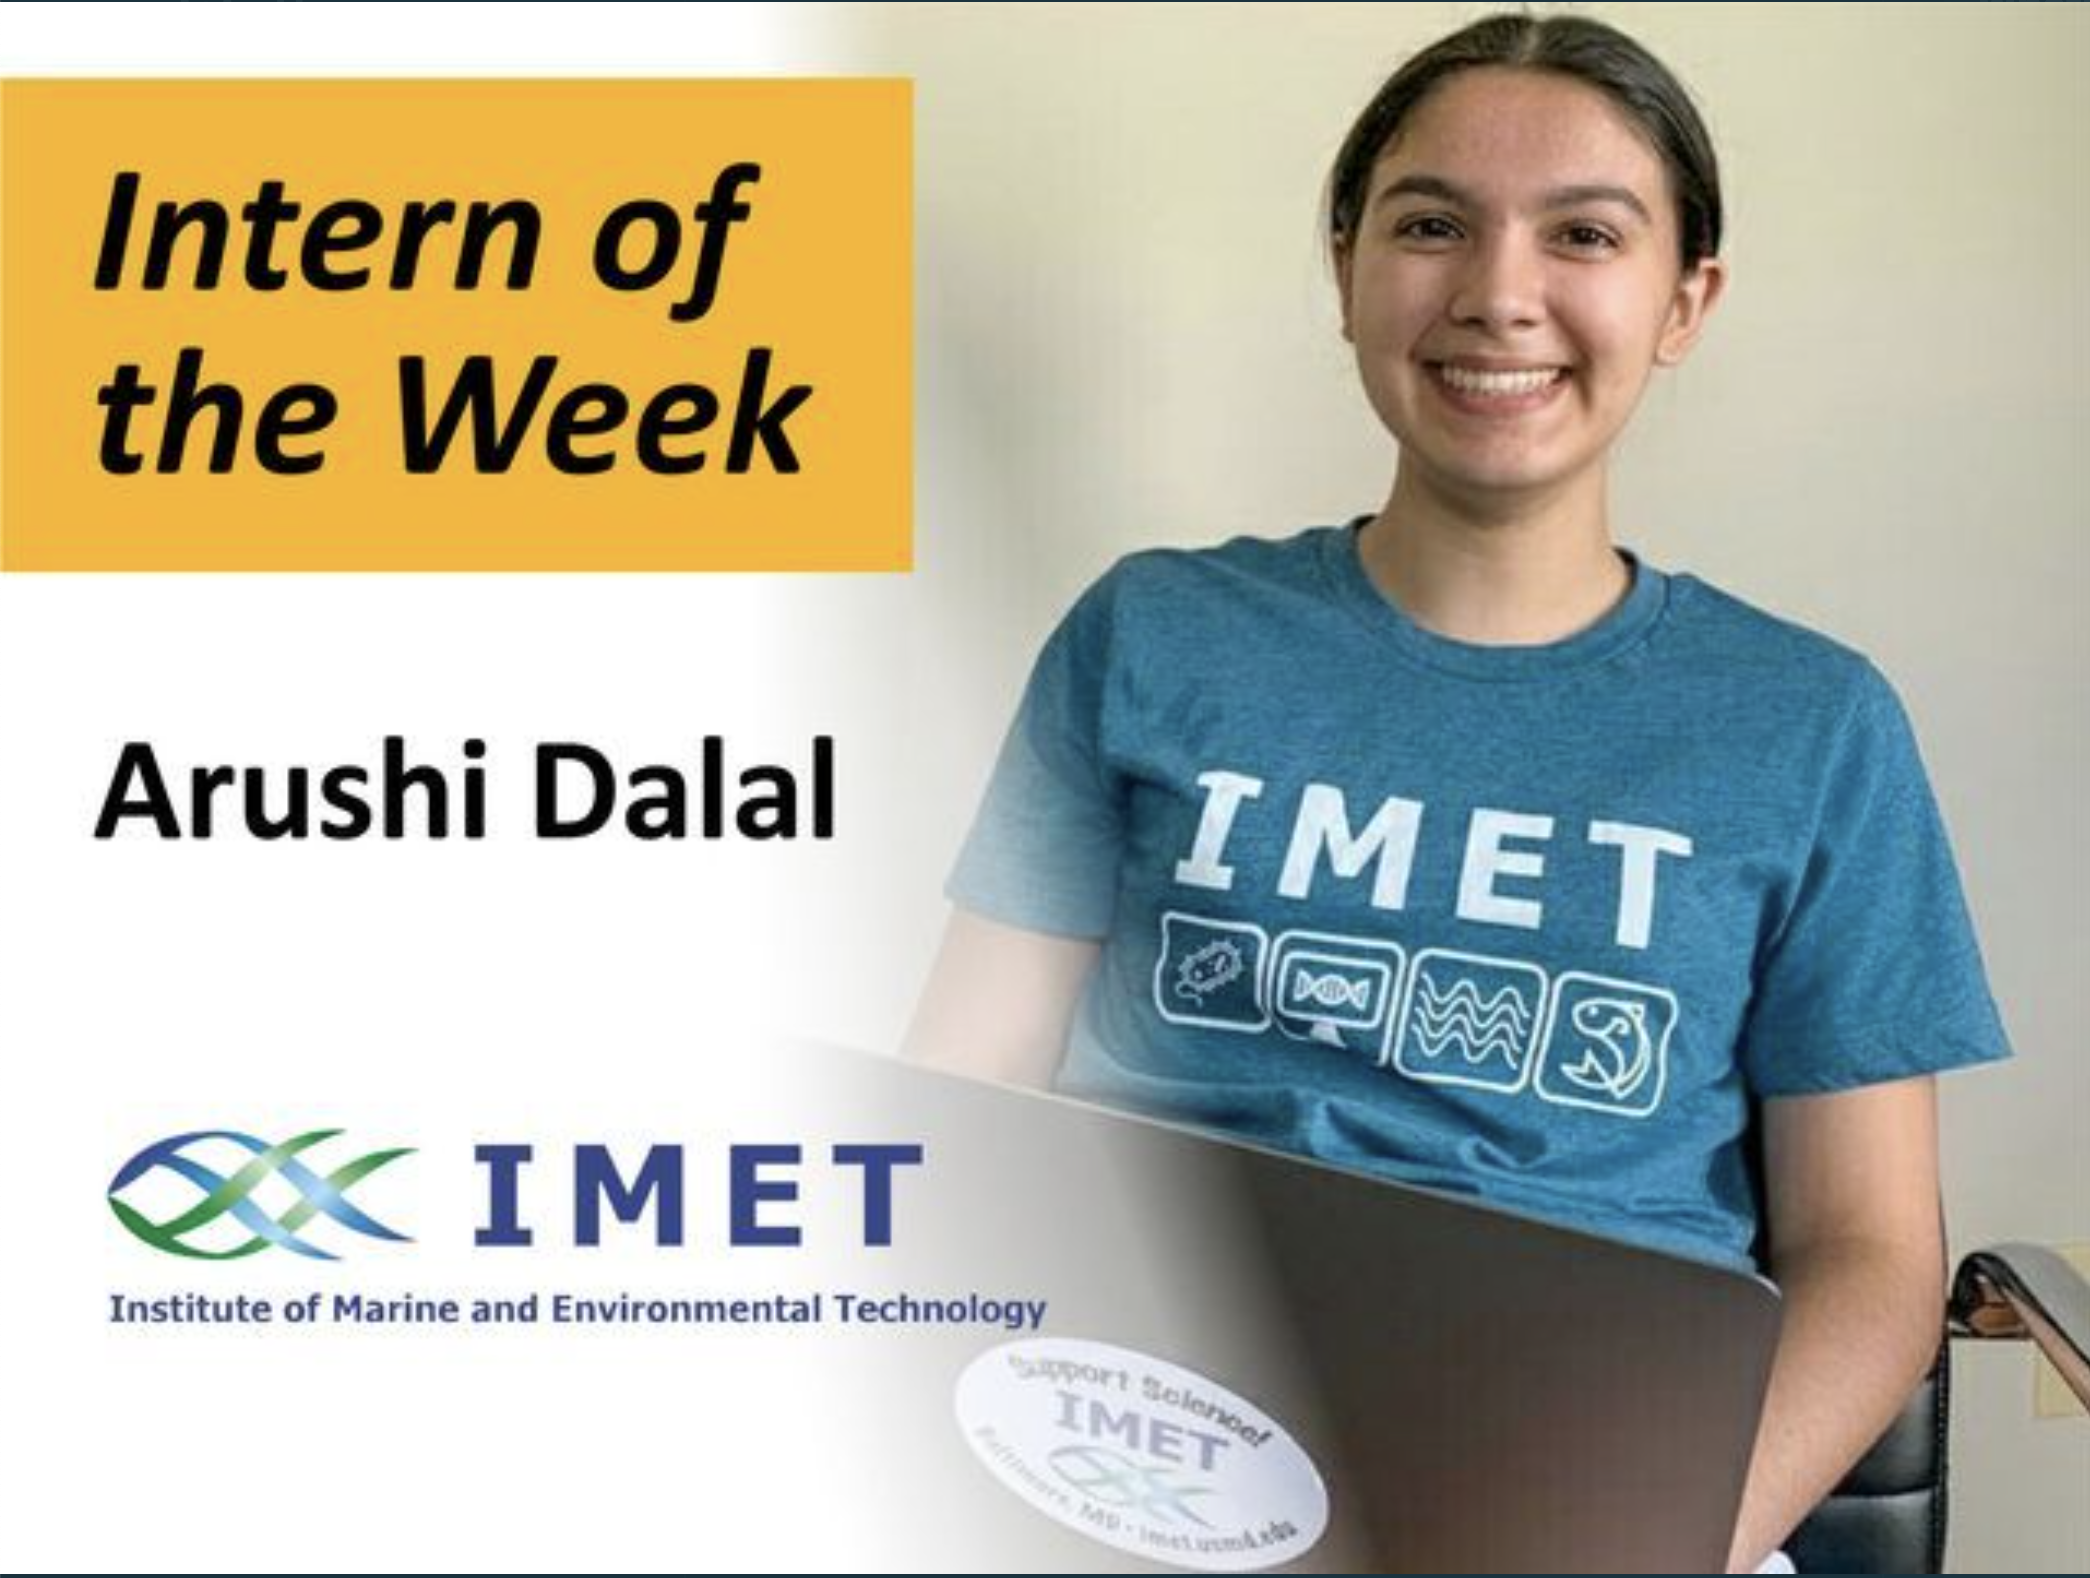 Arushi in IMET Tshirt with text, "Intern of the Week: Arushi Dalal"